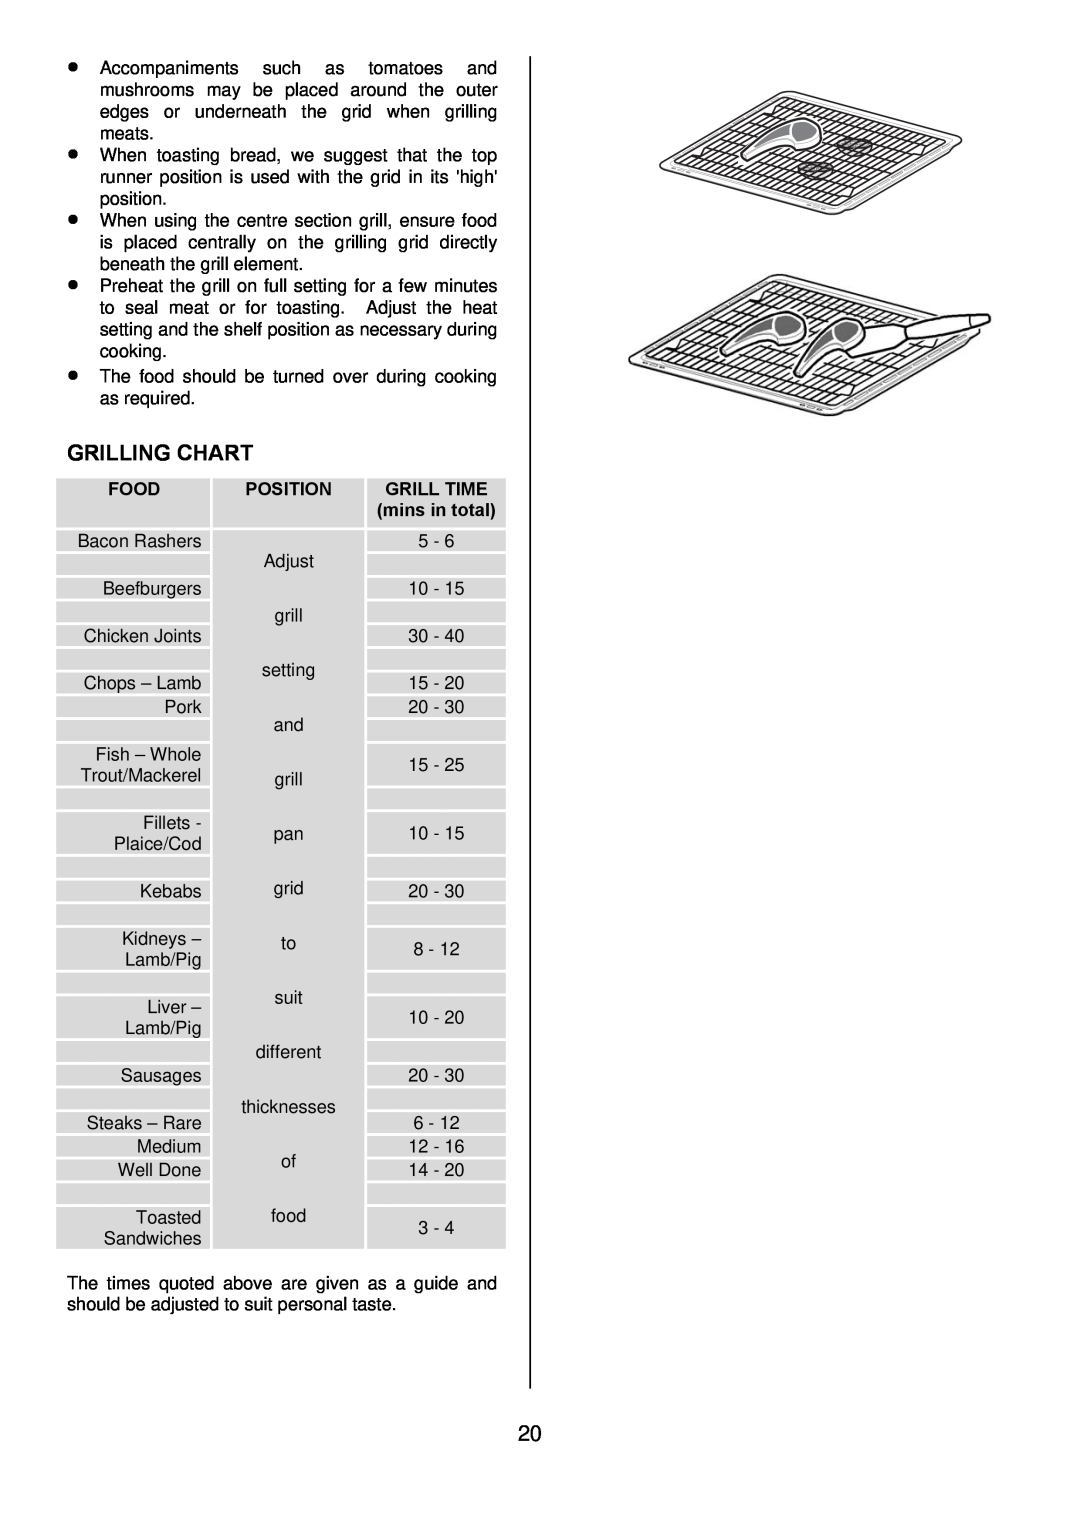 Zanussi ZDQ 995 manual Position, Grilling Chart, Food, GRILL TIME mins in total 